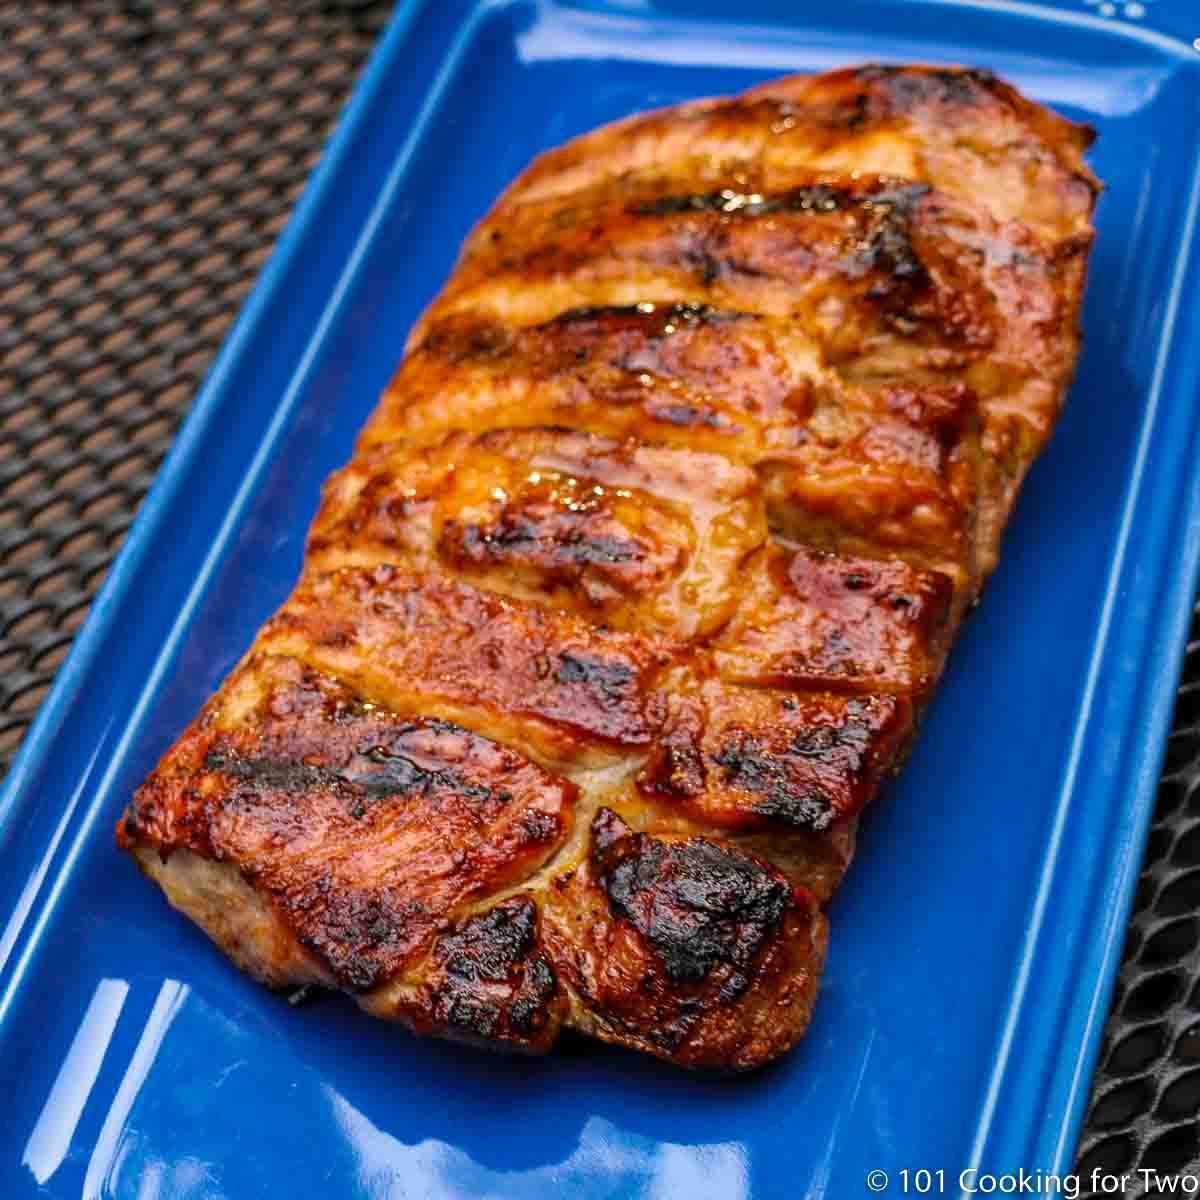 picture of a done boneless pork rib slab on a blue plate